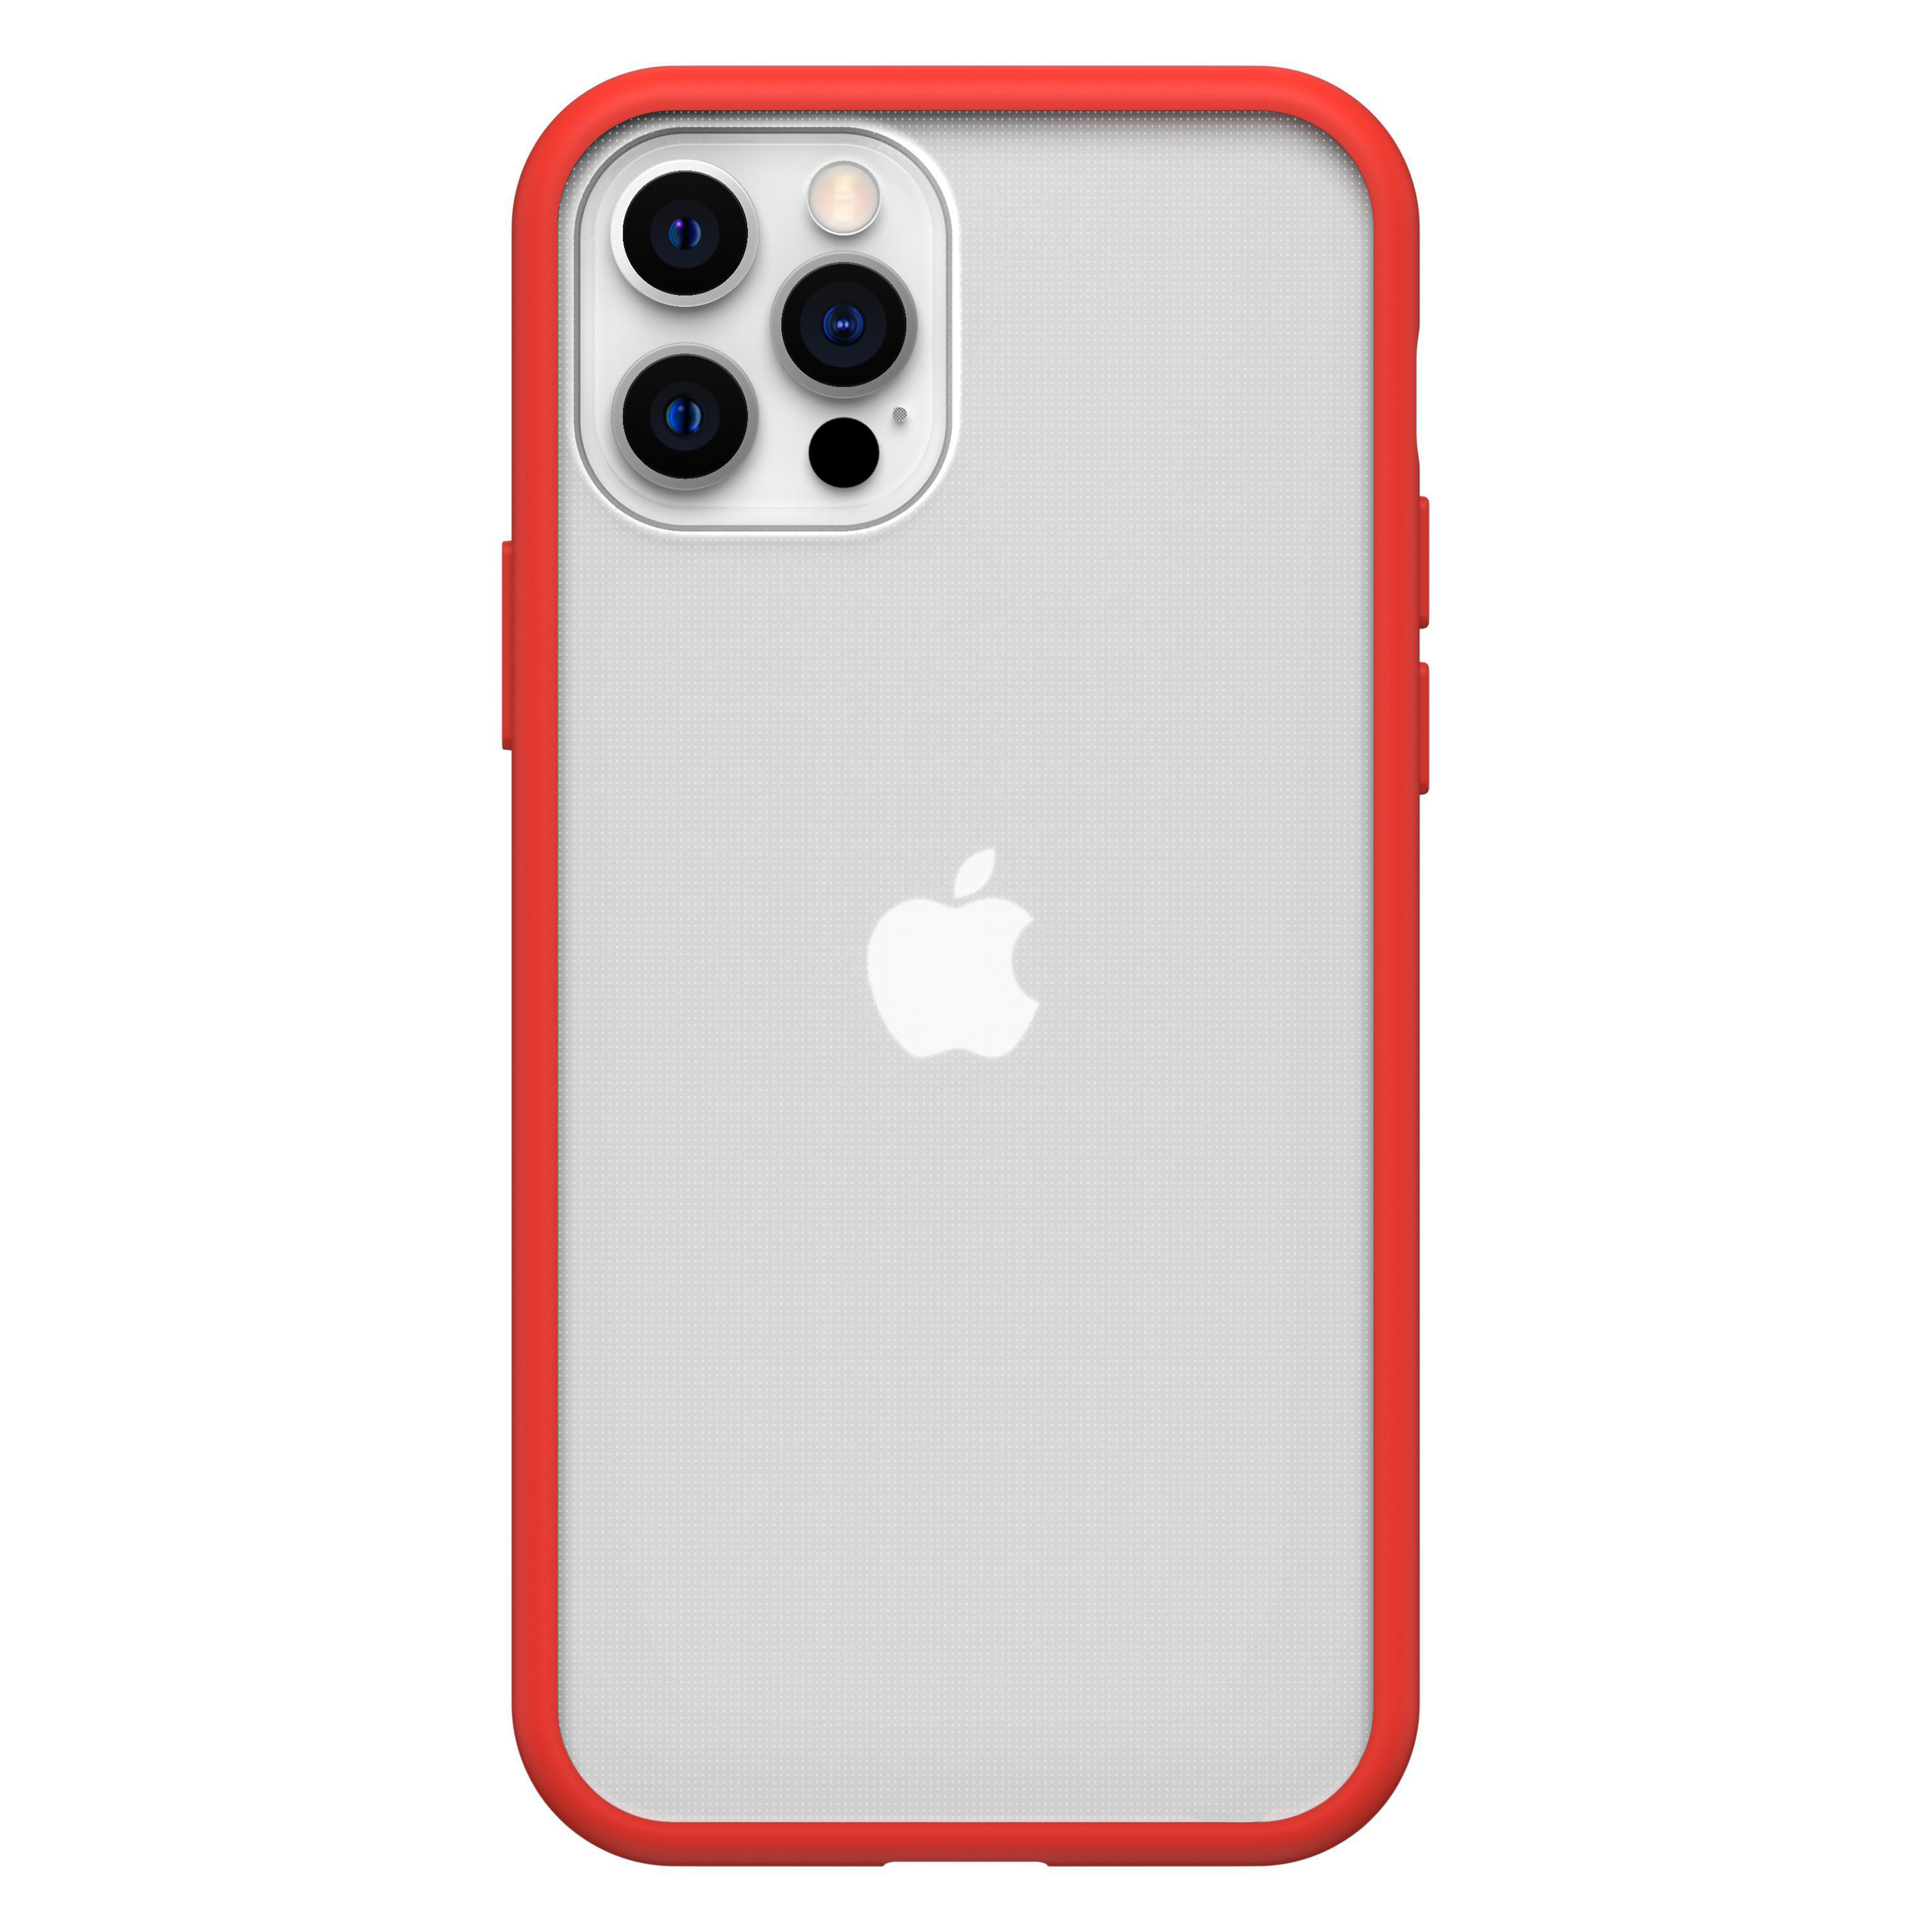 Transparent/Rot iPhone Backcover, Apple, React, Pro, 12, iPhone OTTERBOX 12